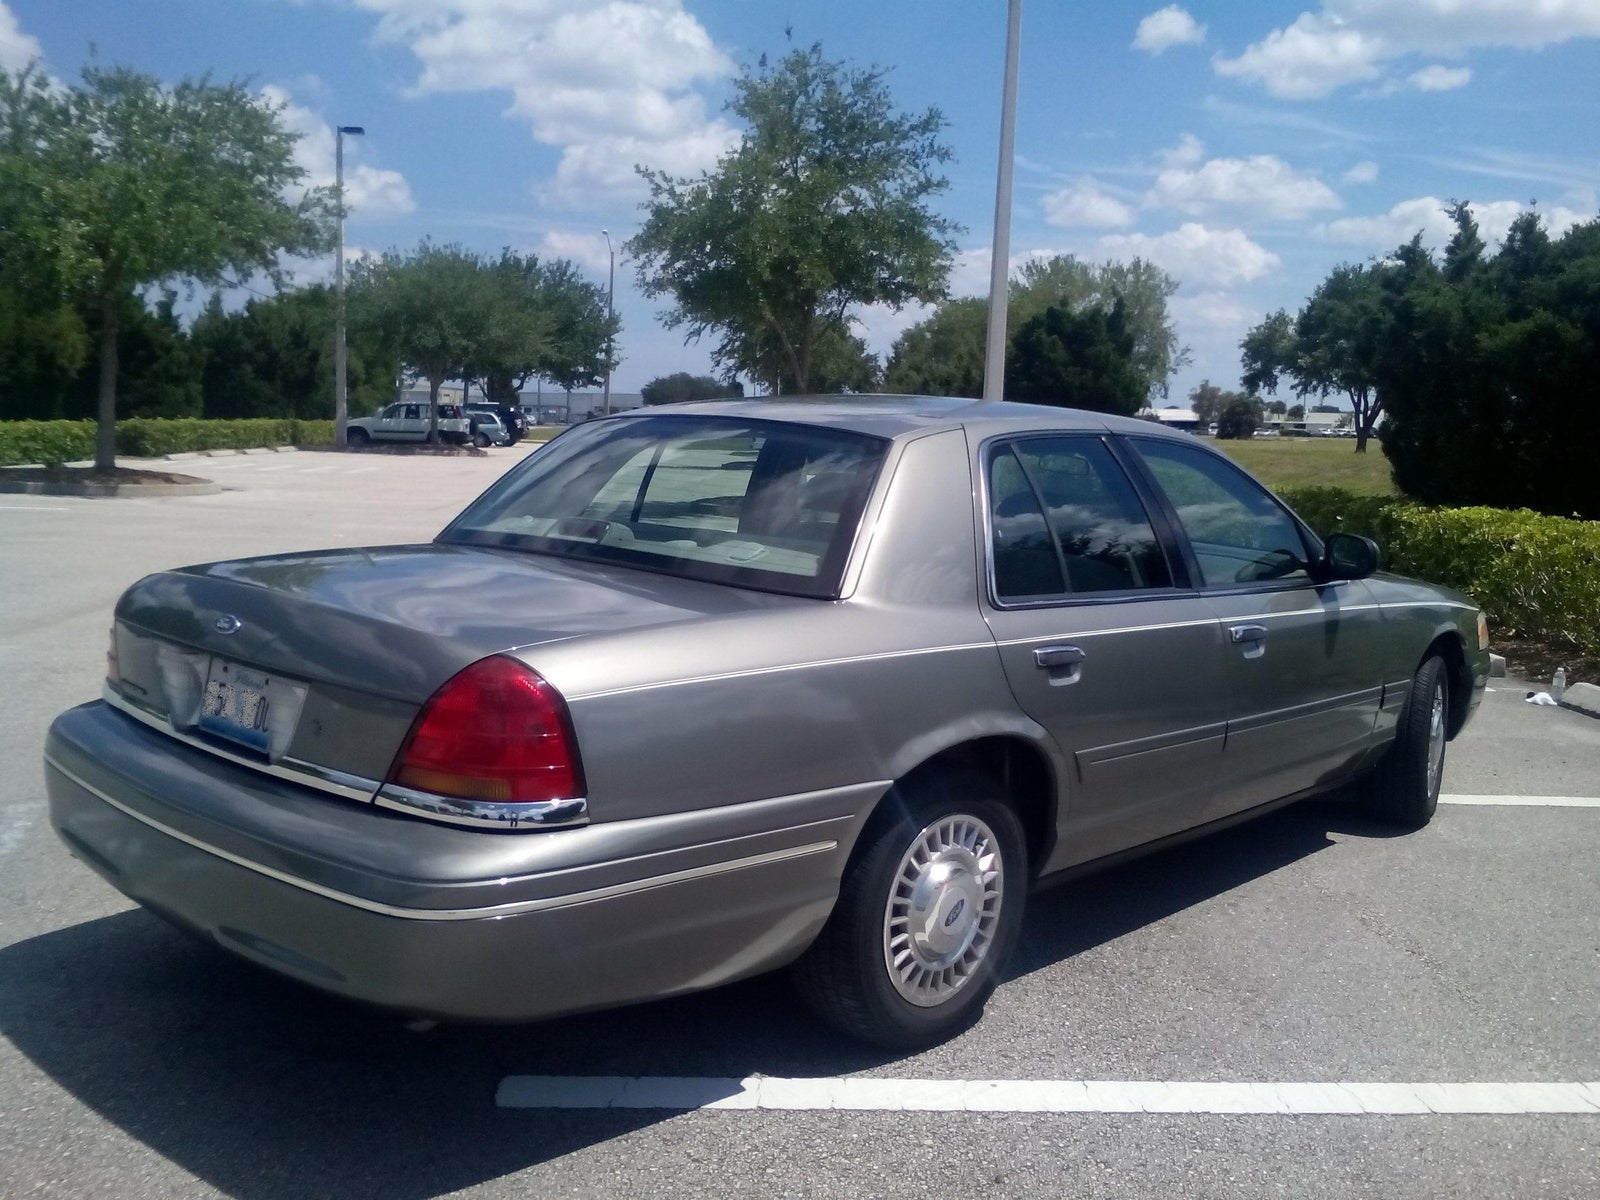 2000 Ford crown victoria police #3